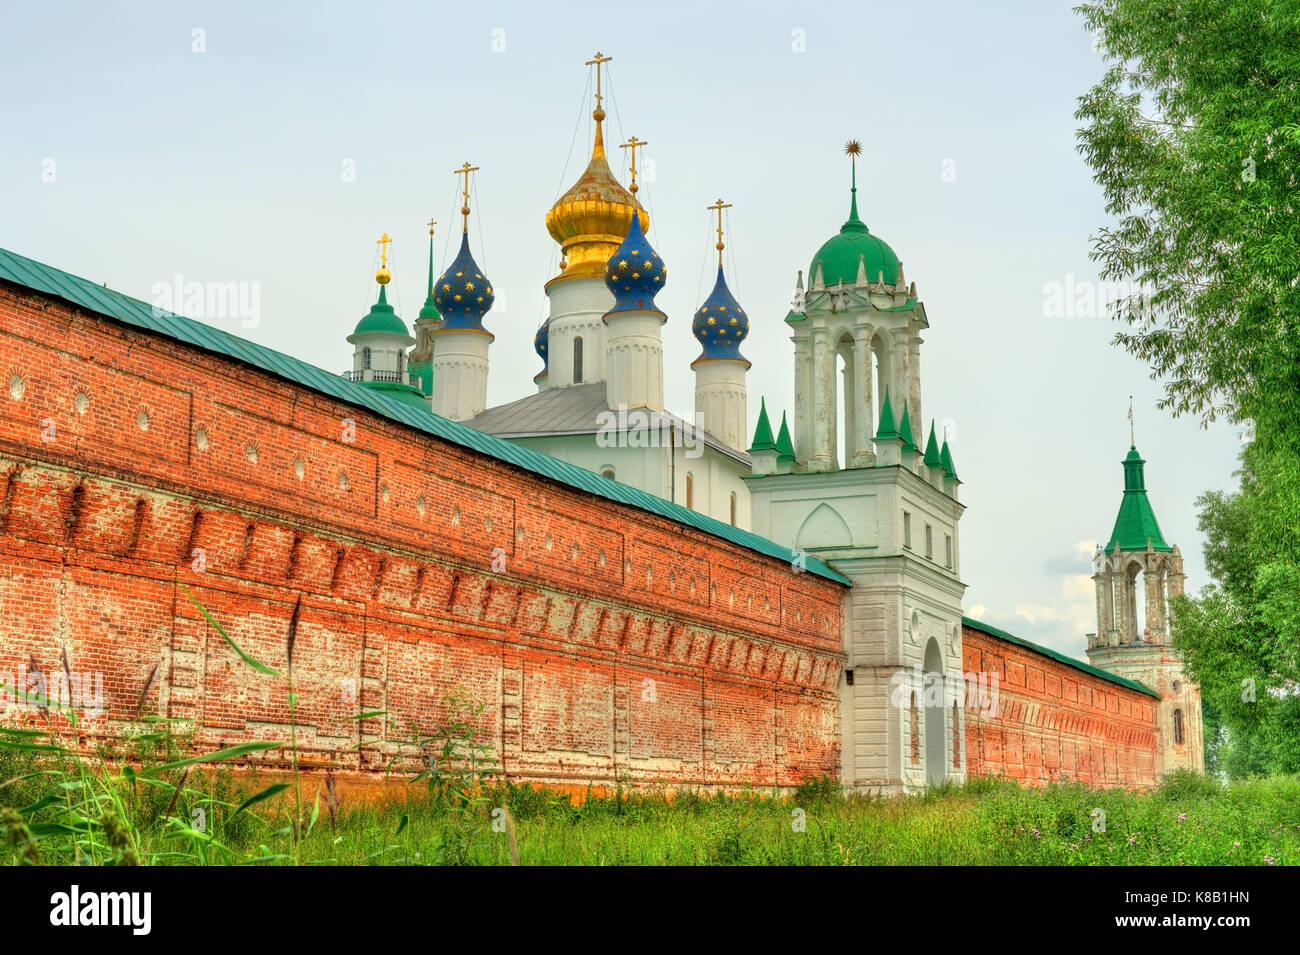 Spaso-Yakovlevsky Monastery or Monastery of St. Jacob Saviour in Rostov, the Golden Ring of Russia Stock Photo